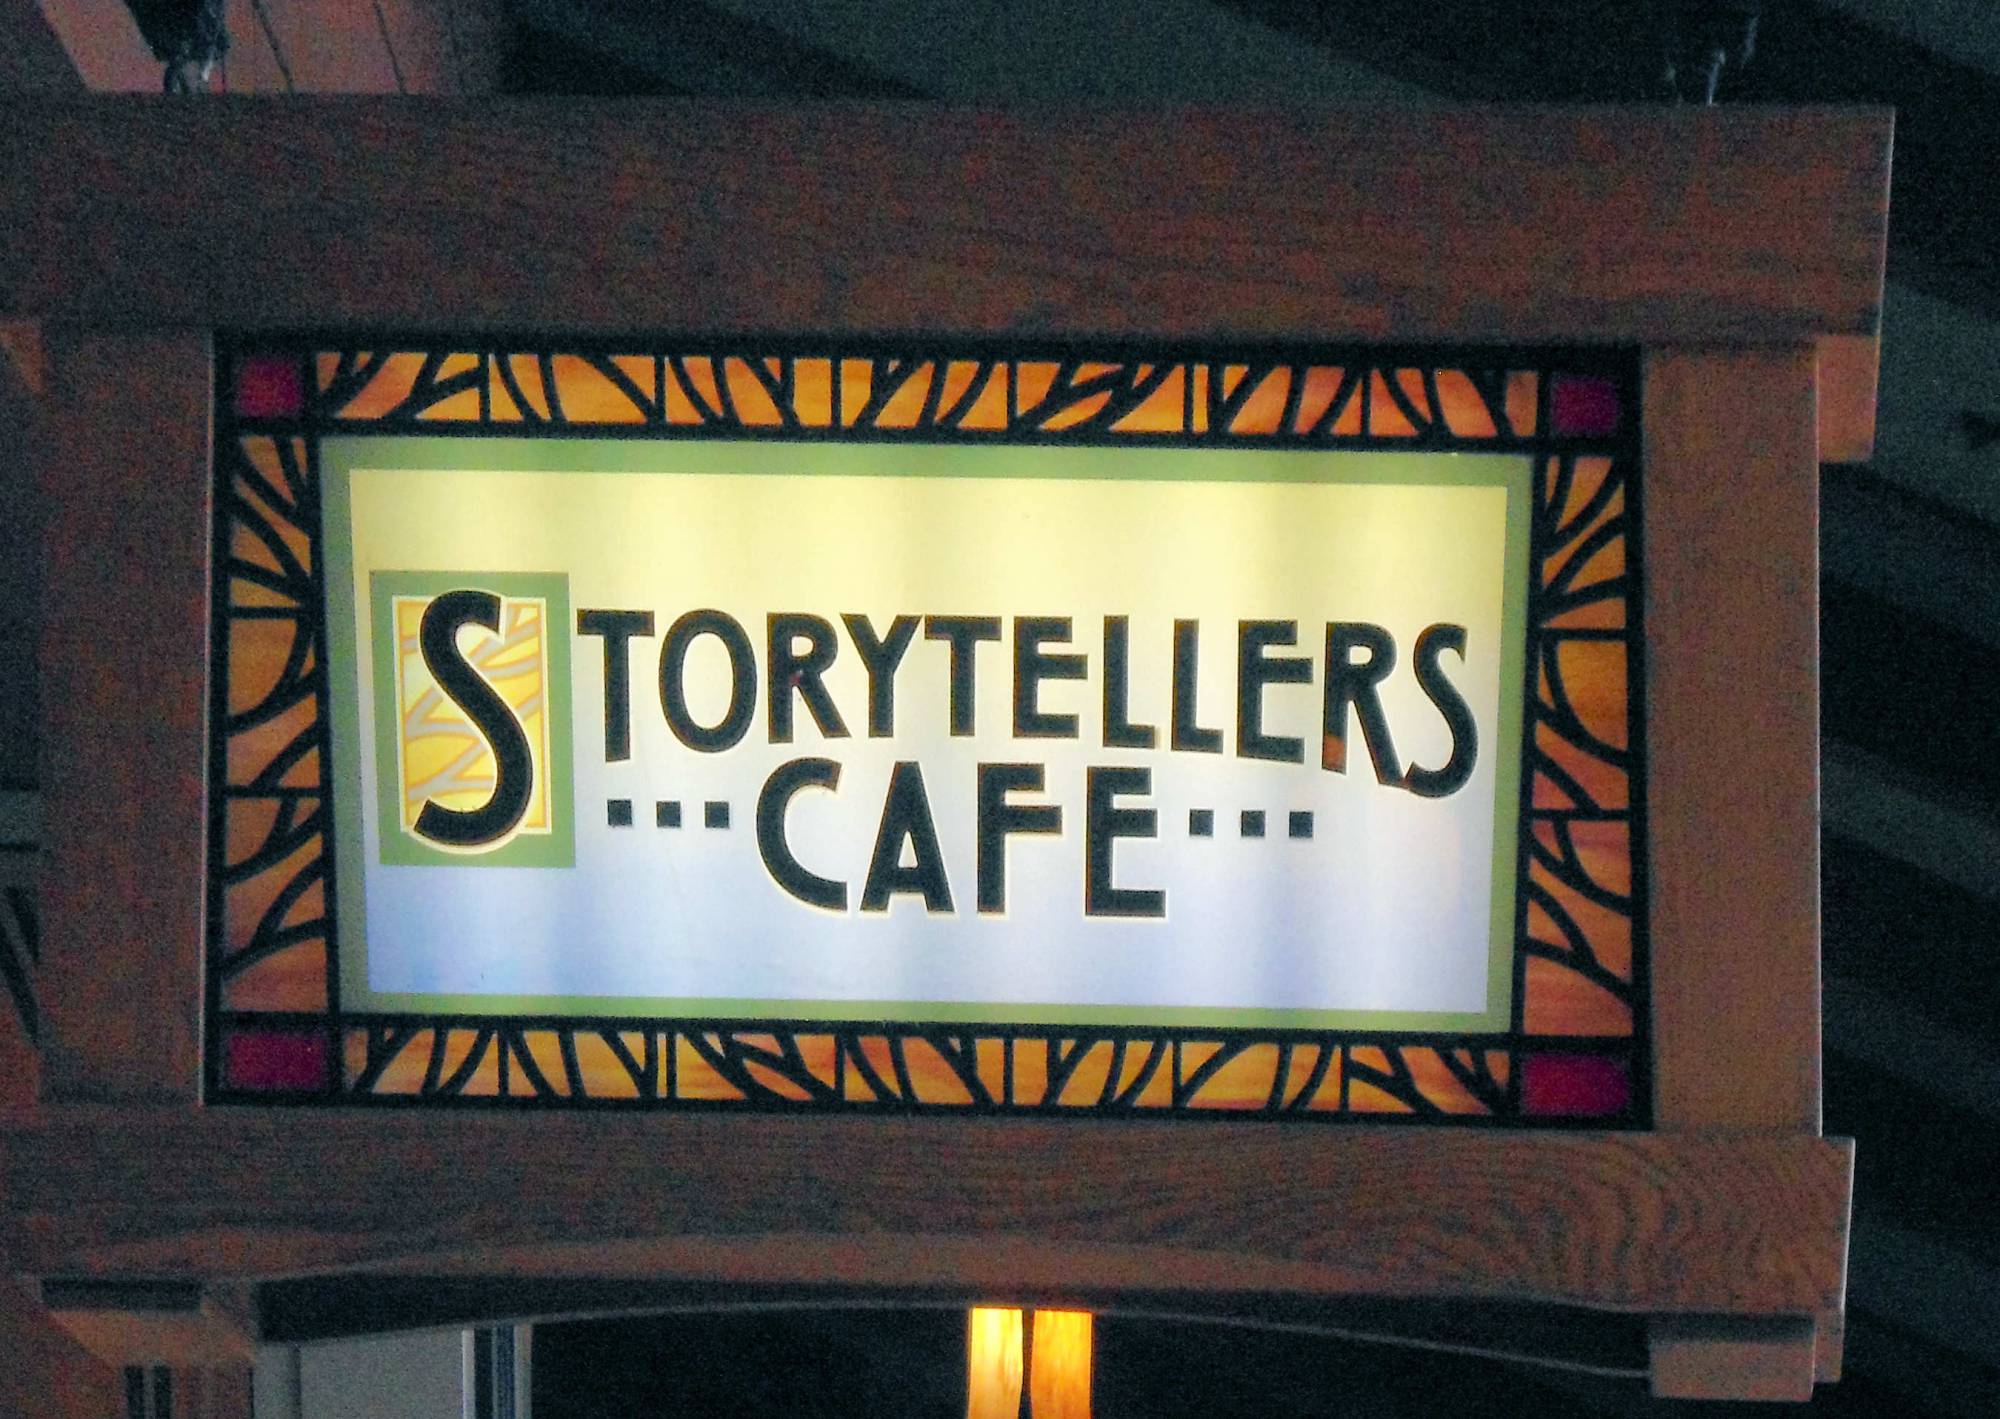 Grand Californian Story Tellers Cafe